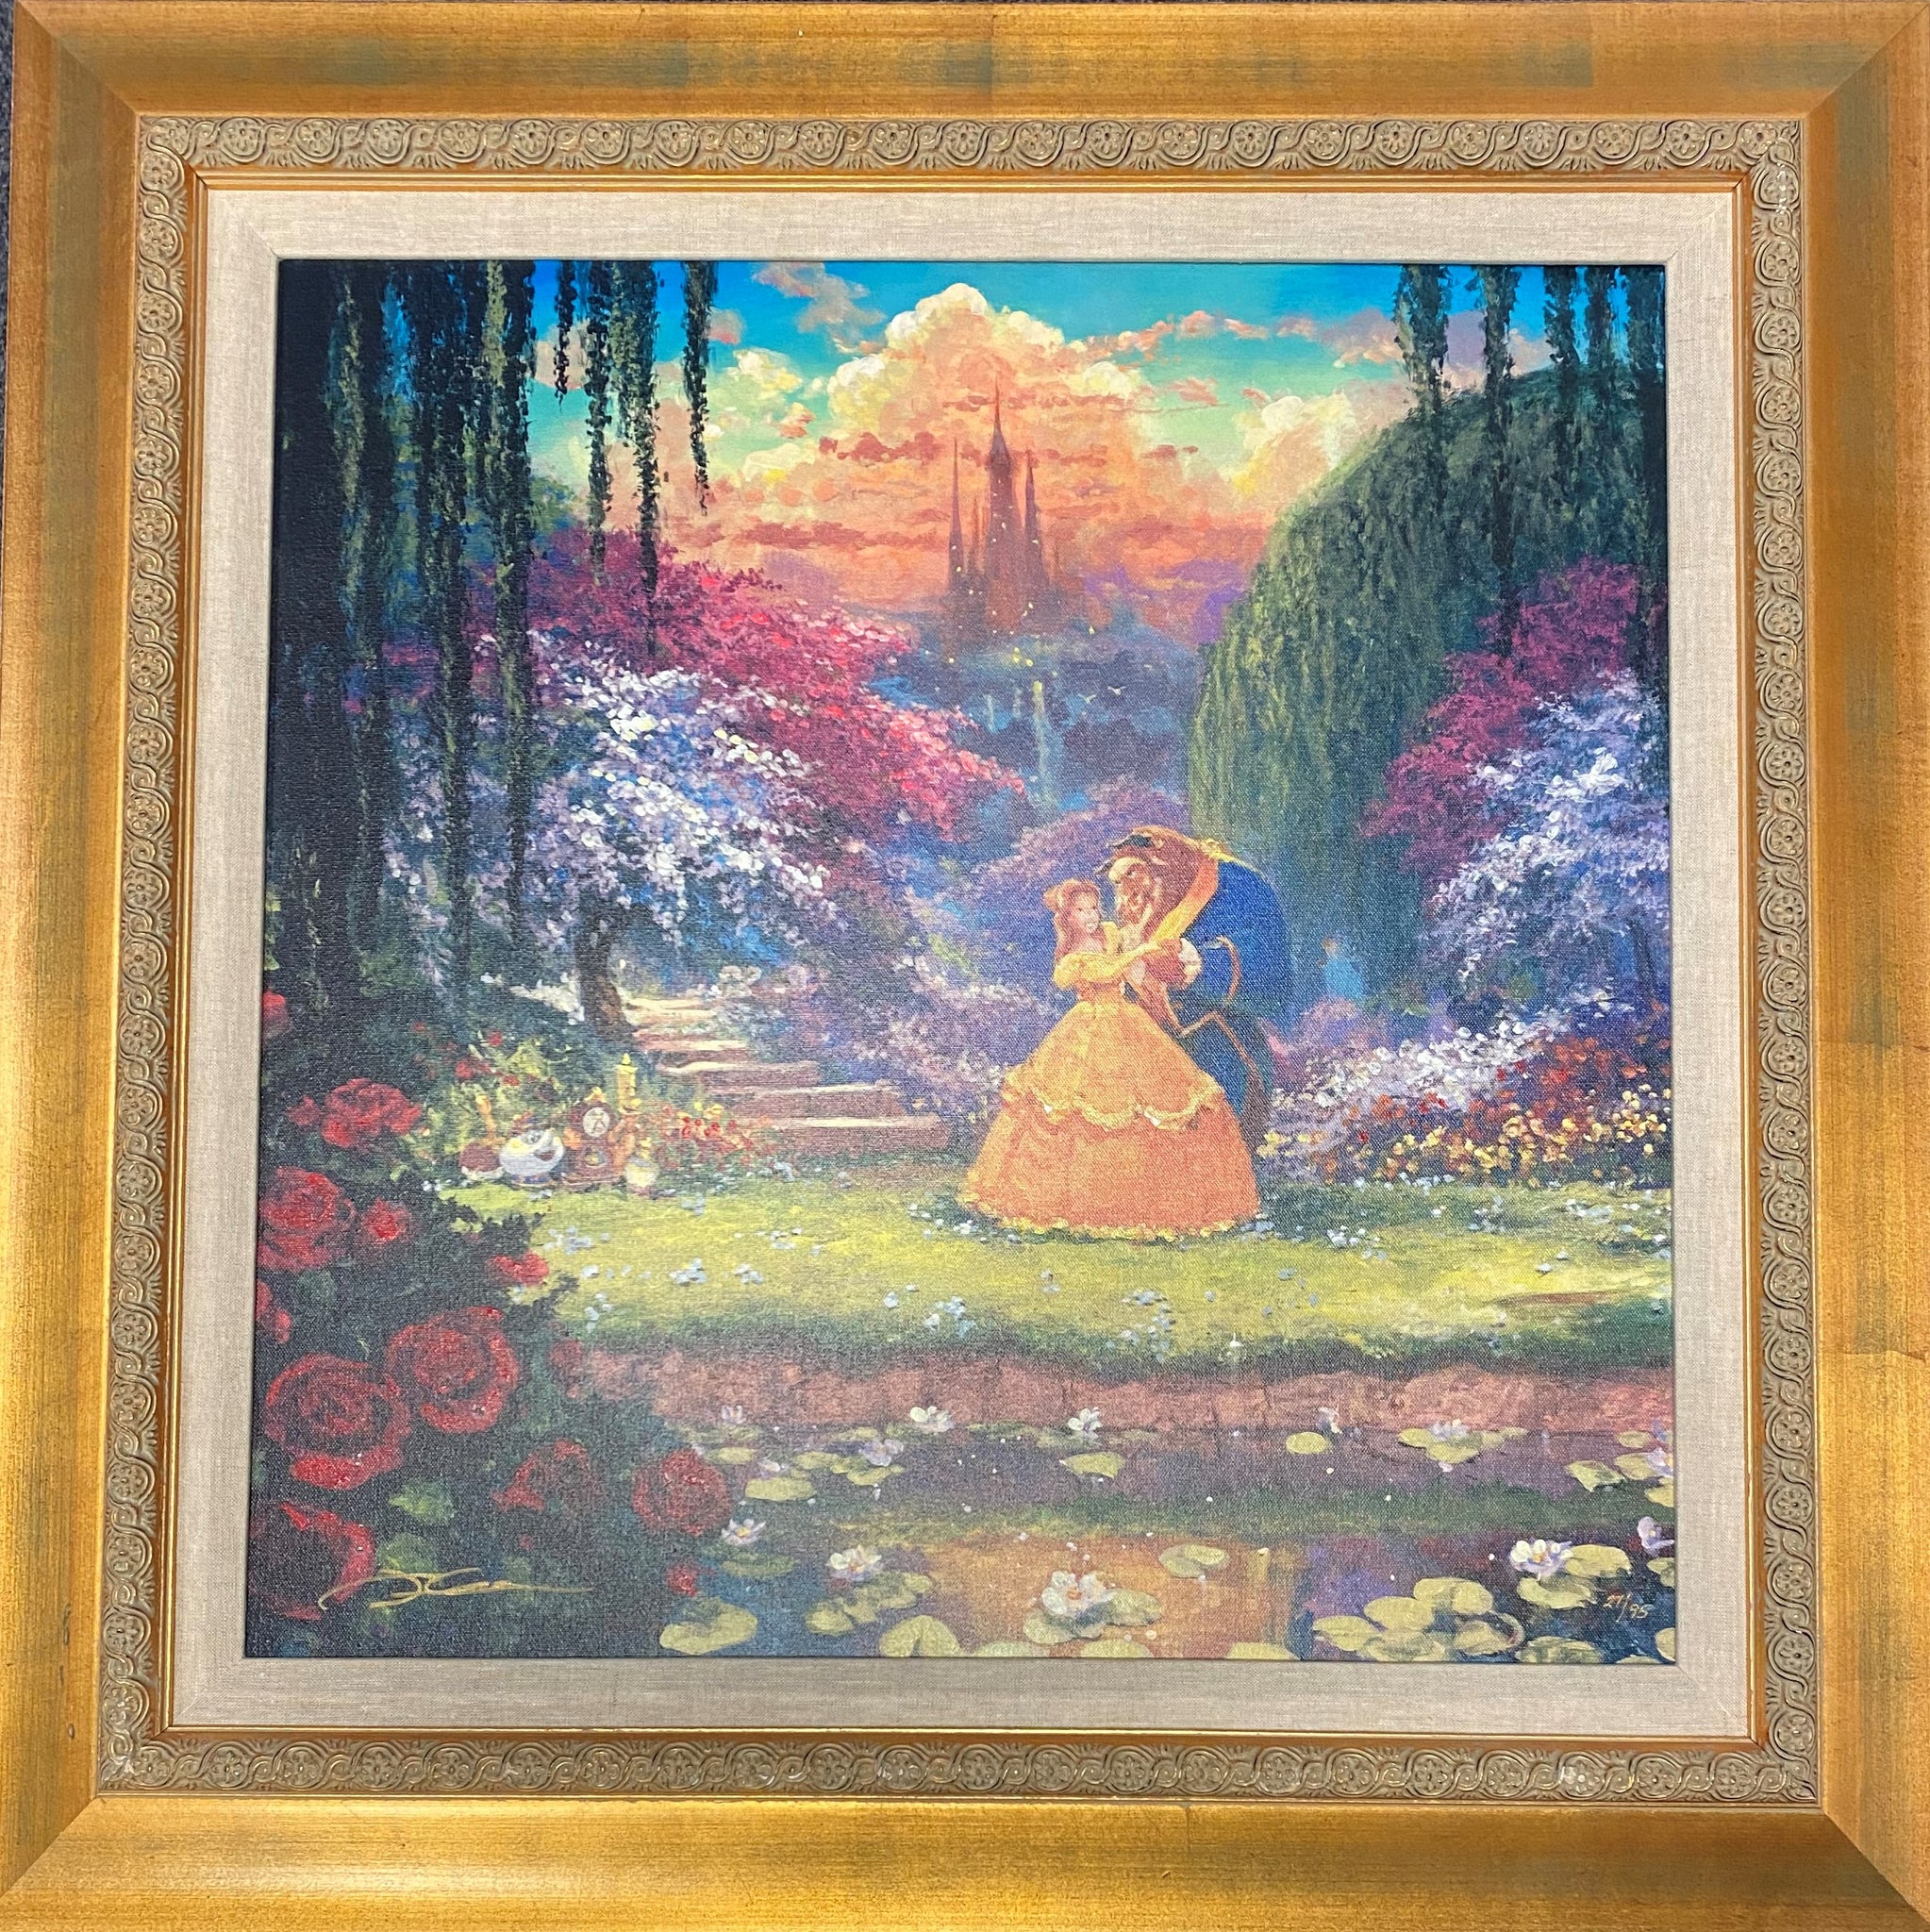 Garden Waltz Framed by James Coleman Inspired by Beauty and The Beast